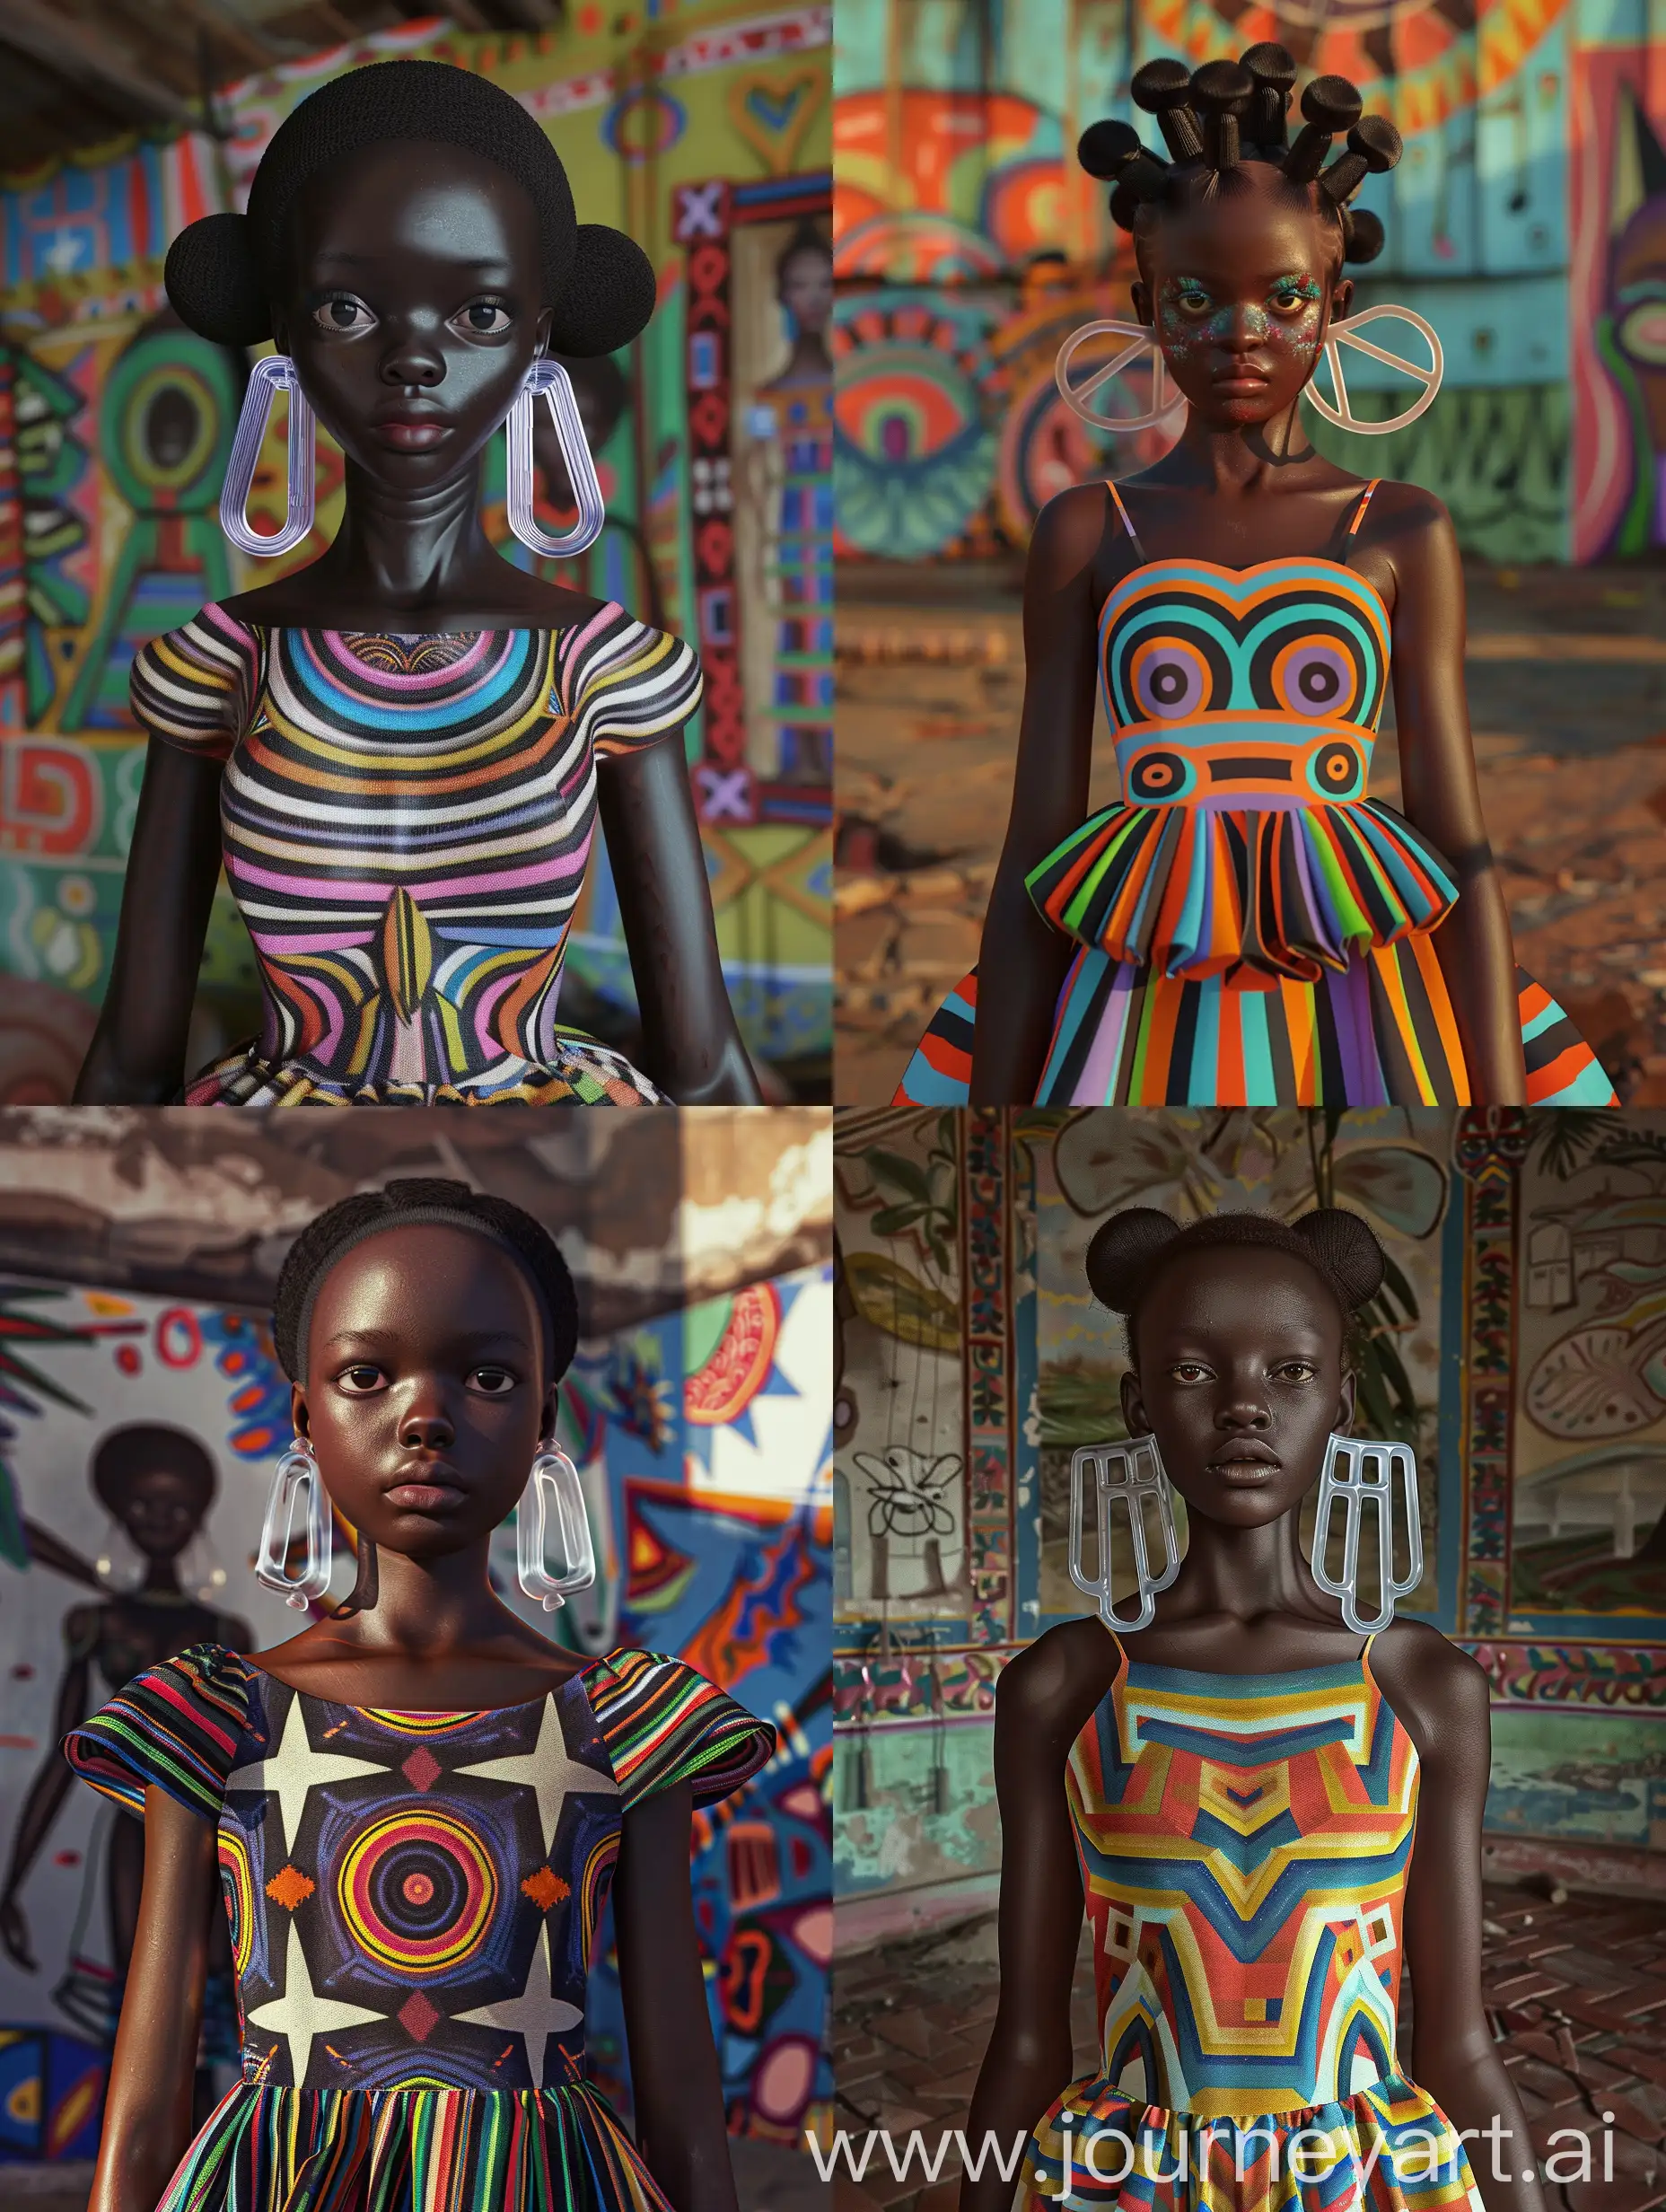 African-Girl-in-Colorful-Dress-with-Symmetrical-Patterns-and-Murals-Background